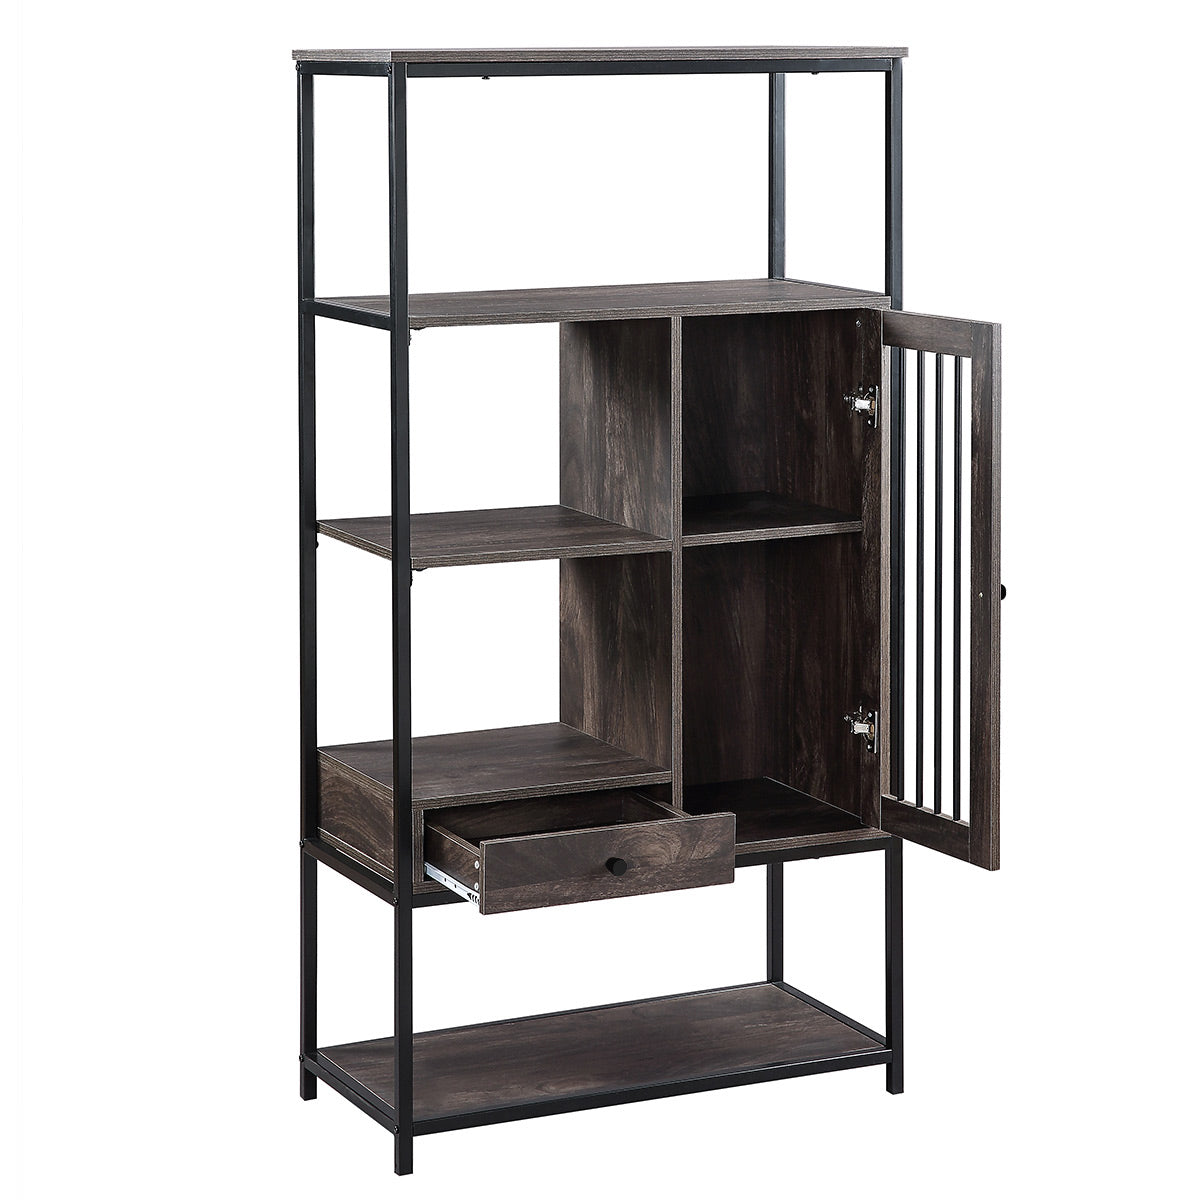 Home Office Bookcase and Bookshelf 5 Tier Display